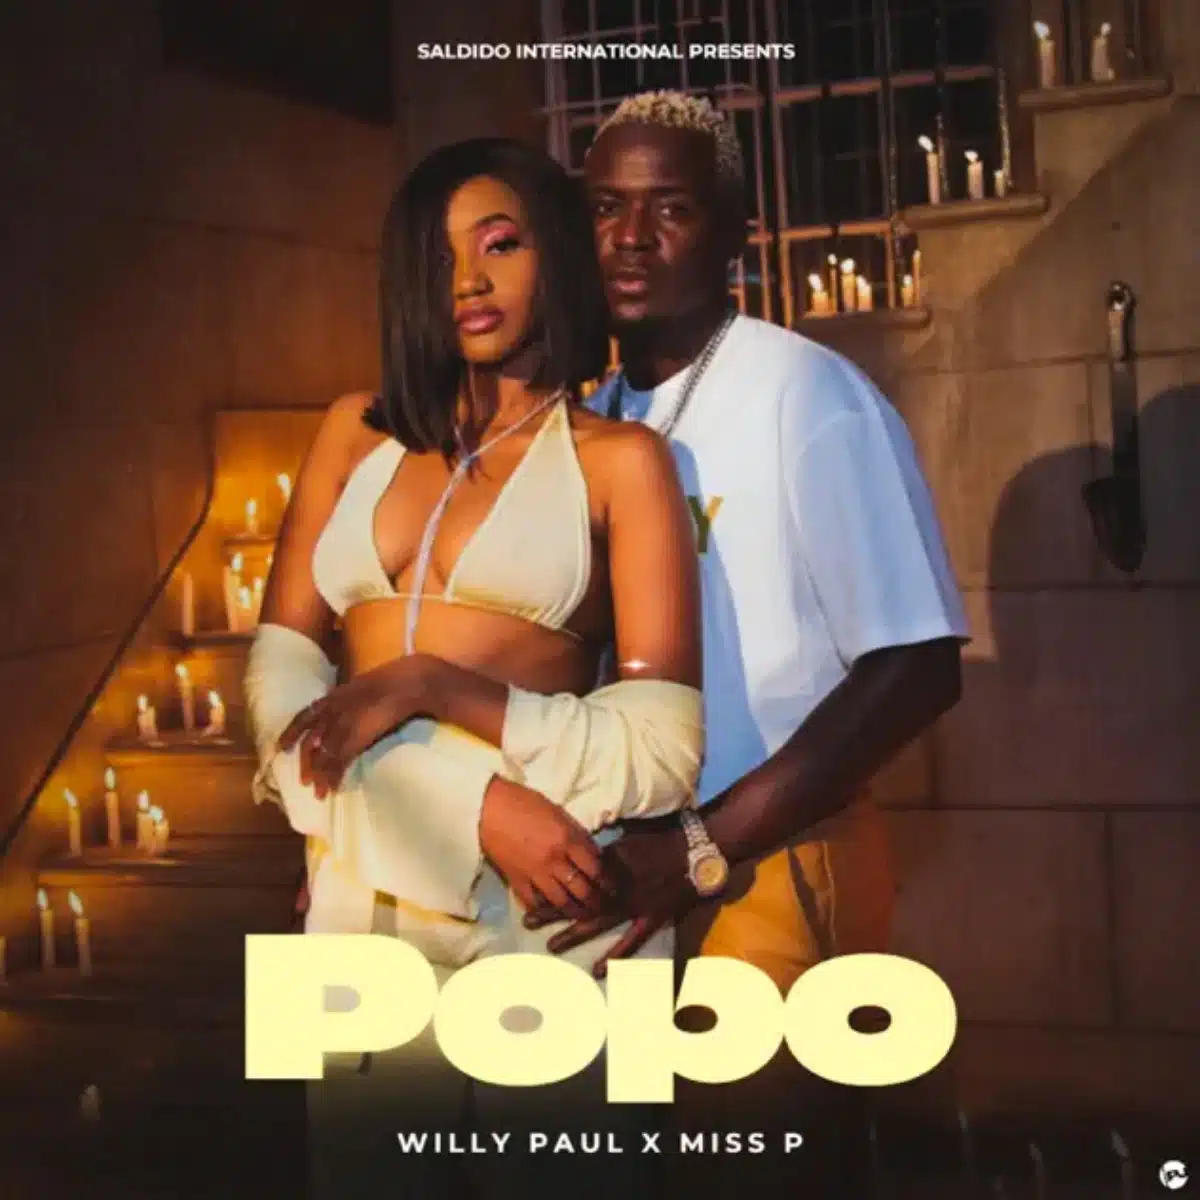 DOWNLOAD: Willy Paul x Miss P – “POPO” (Video & Audio) Mp3